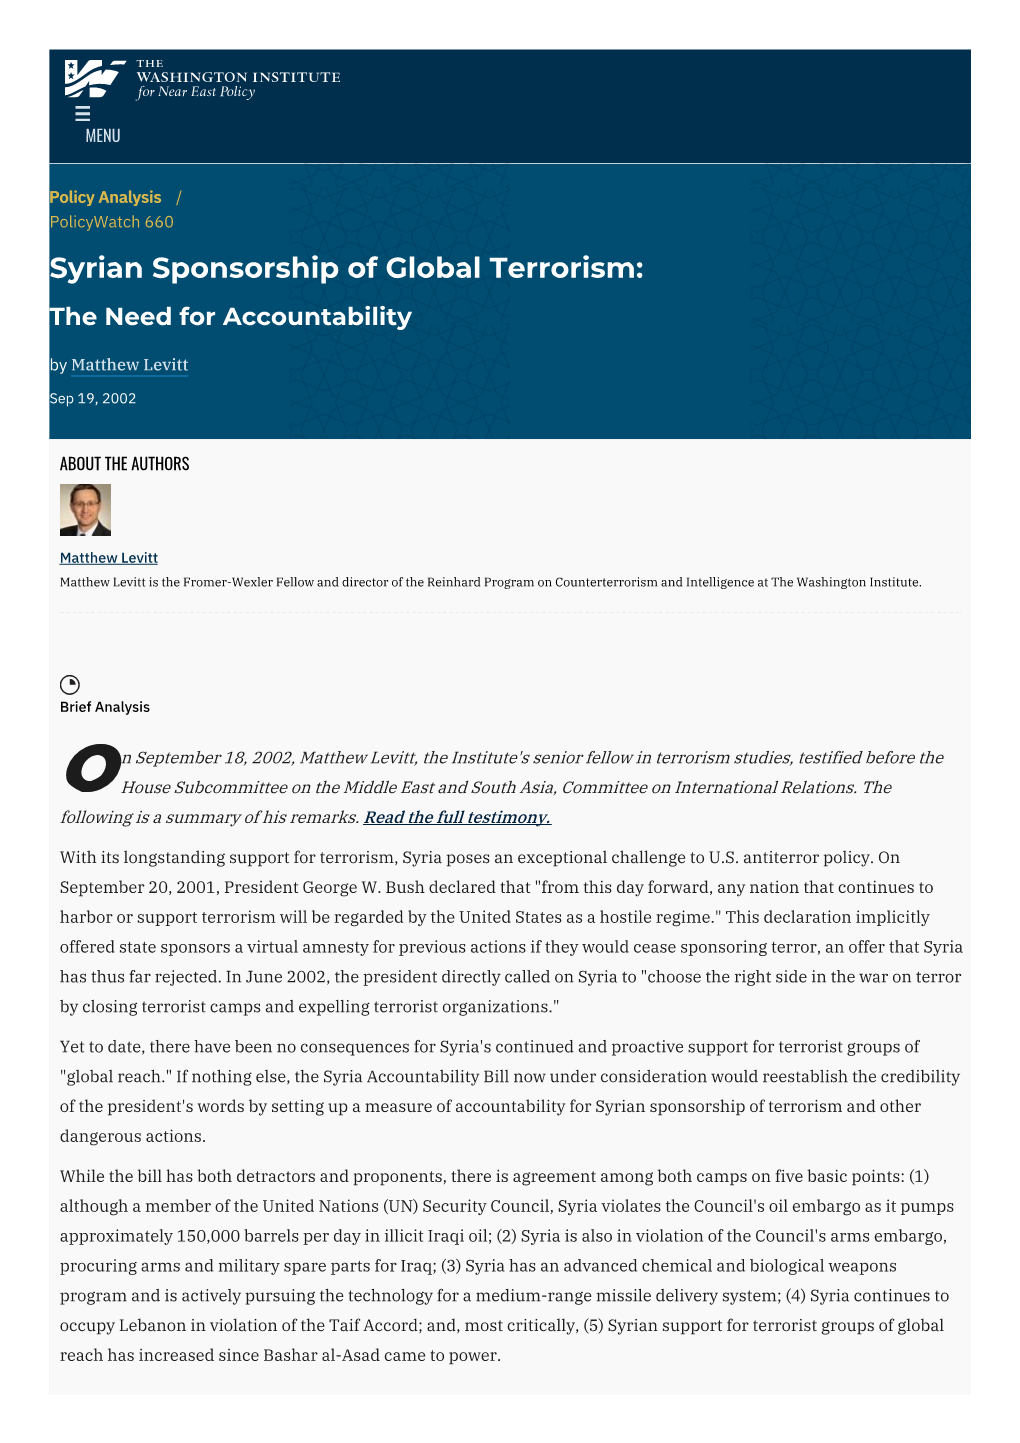 Syrian Sponsorship of Global Terrorism: the Need for Accountability by Matthew Levitt